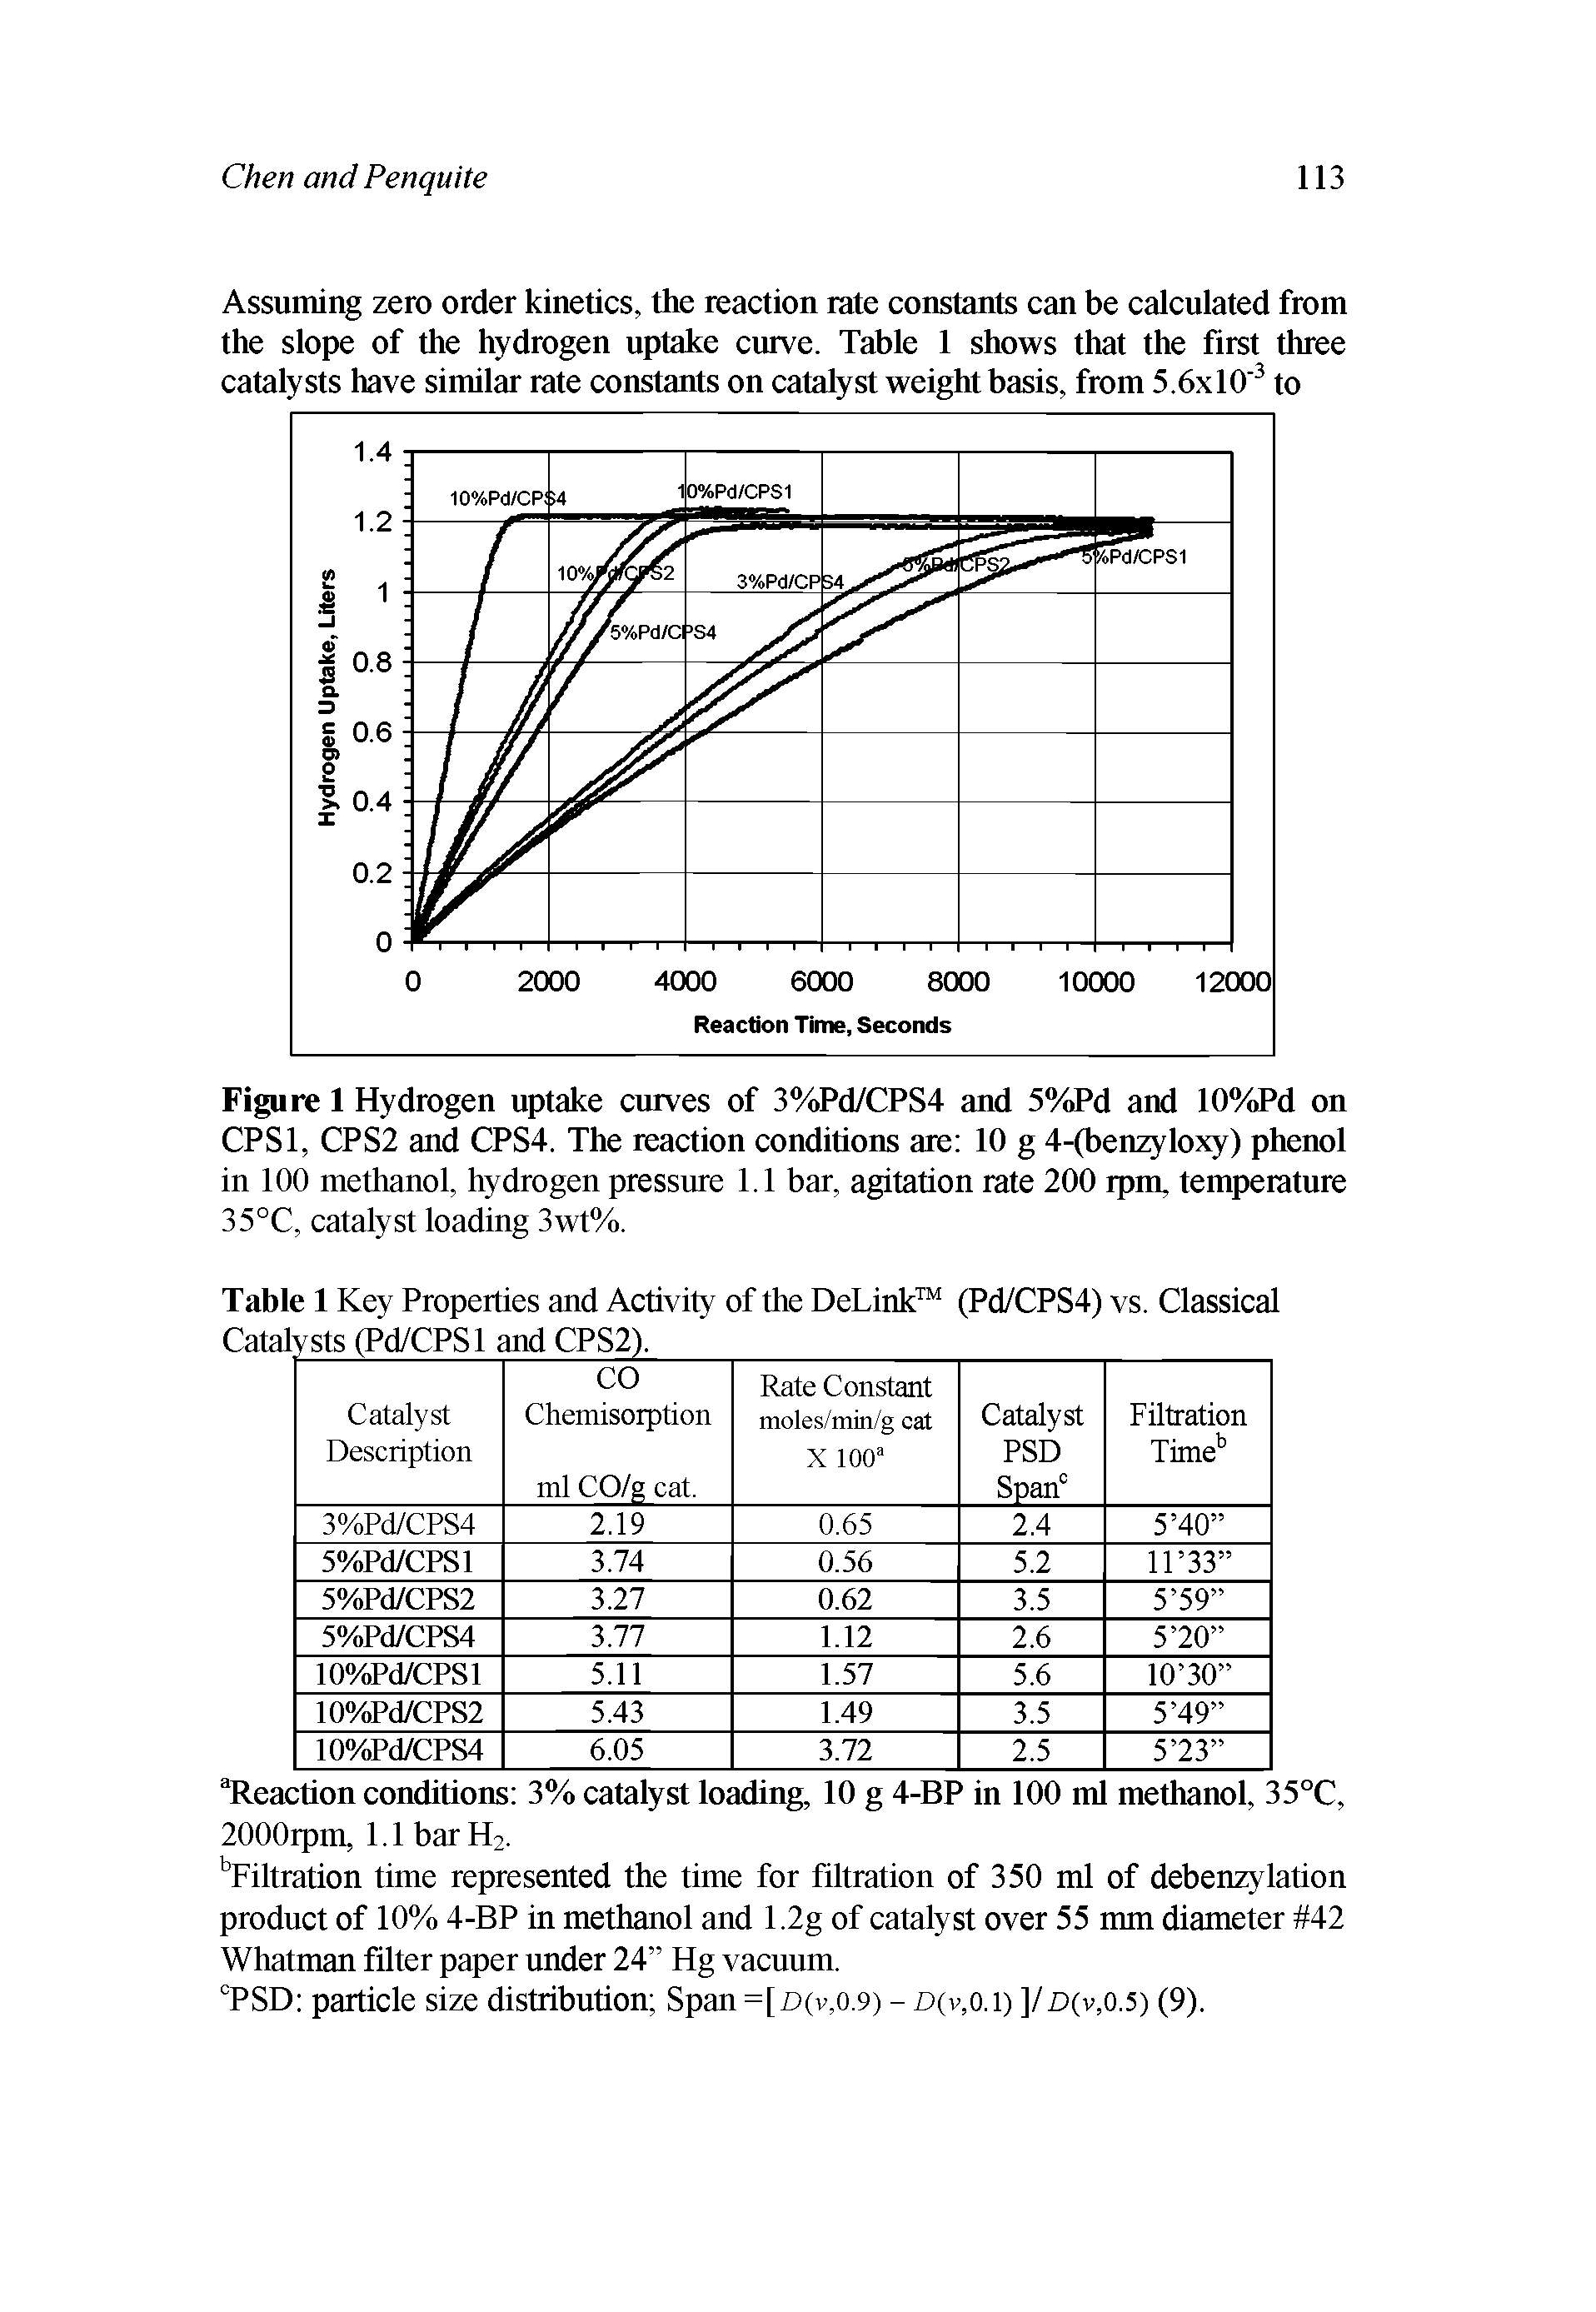 Figure 1 Hydrogen uptake curves of 3%Pd/CPS4 and 5%Pd and 10%Pd on CPS1, CPS2 and CPS4. The reaction conditions are 10 g 4-(benzyloxy) phenol in 100 methanol, hydrogen pressure 1.1 bar, agitation rate 200 rpm, temperature 35°C, catalyst loading 3wt%.